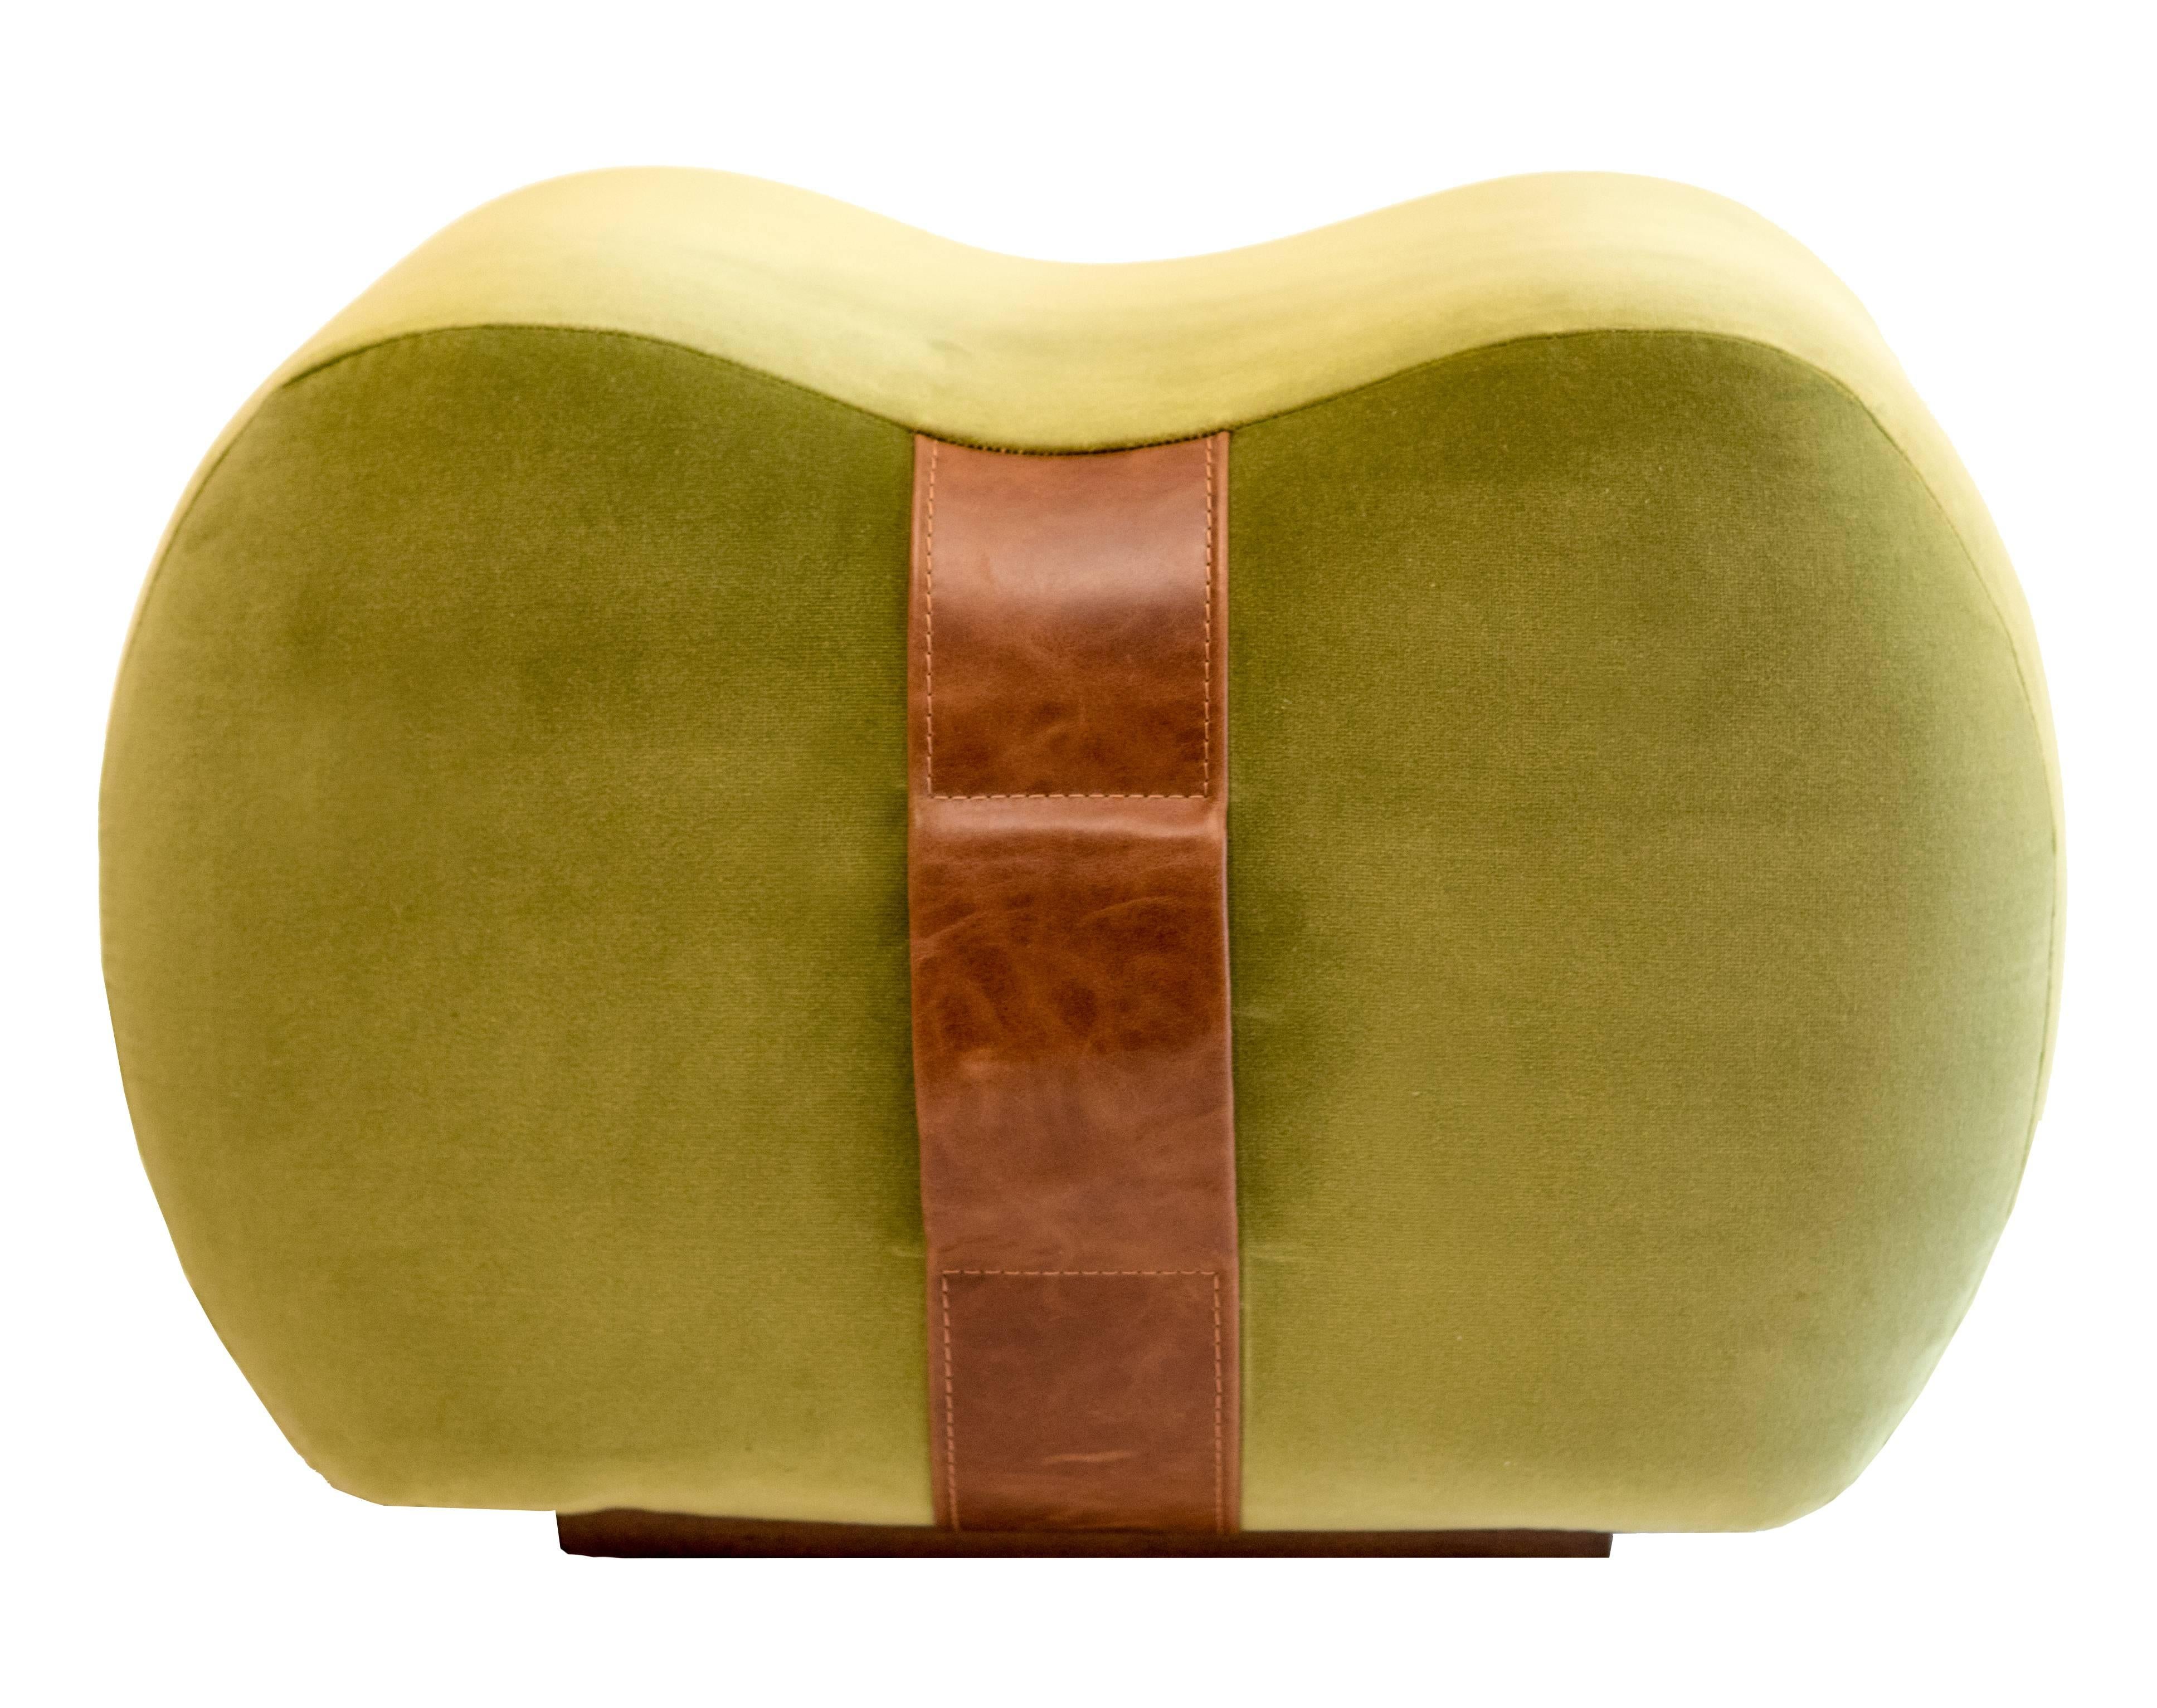 The Milo Bean, you can sit on it, lean against it and carry it. This fun, colorful, curvy design by Marie Burgos may be the ultimate in portable seating. Crafted in plush fabrics with leather accent handles The Milo Bean offers style, convenience